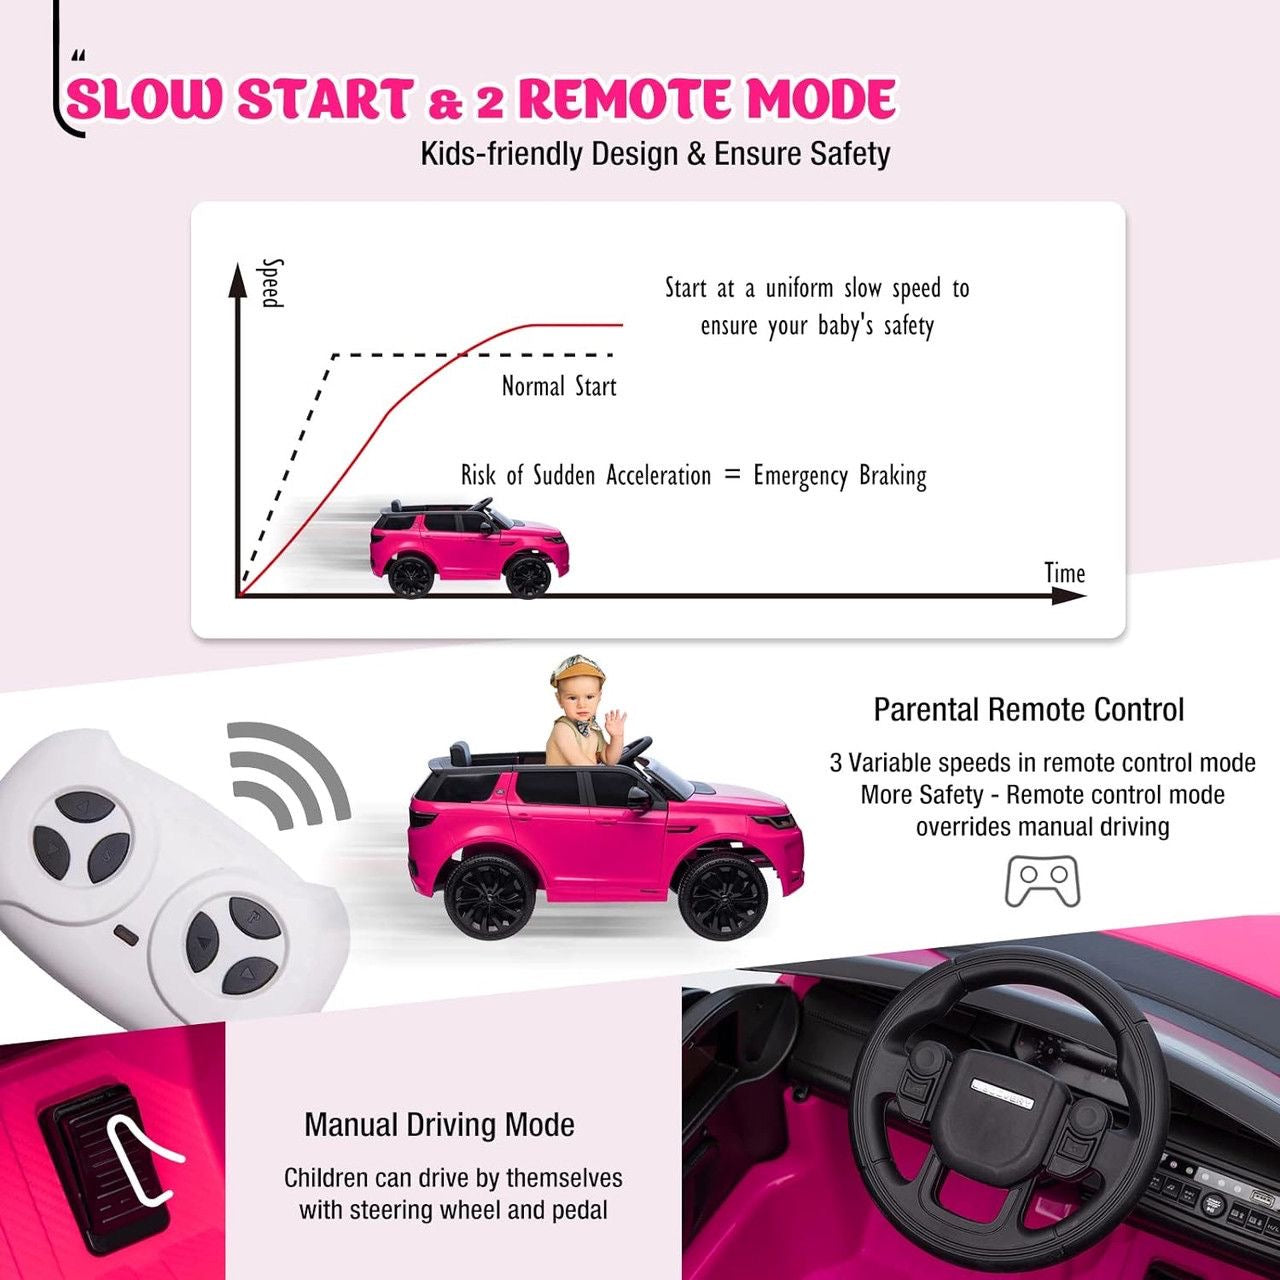 Licensed Range Discovery Sport 12v Kids Ride on Car with Remote - Pink